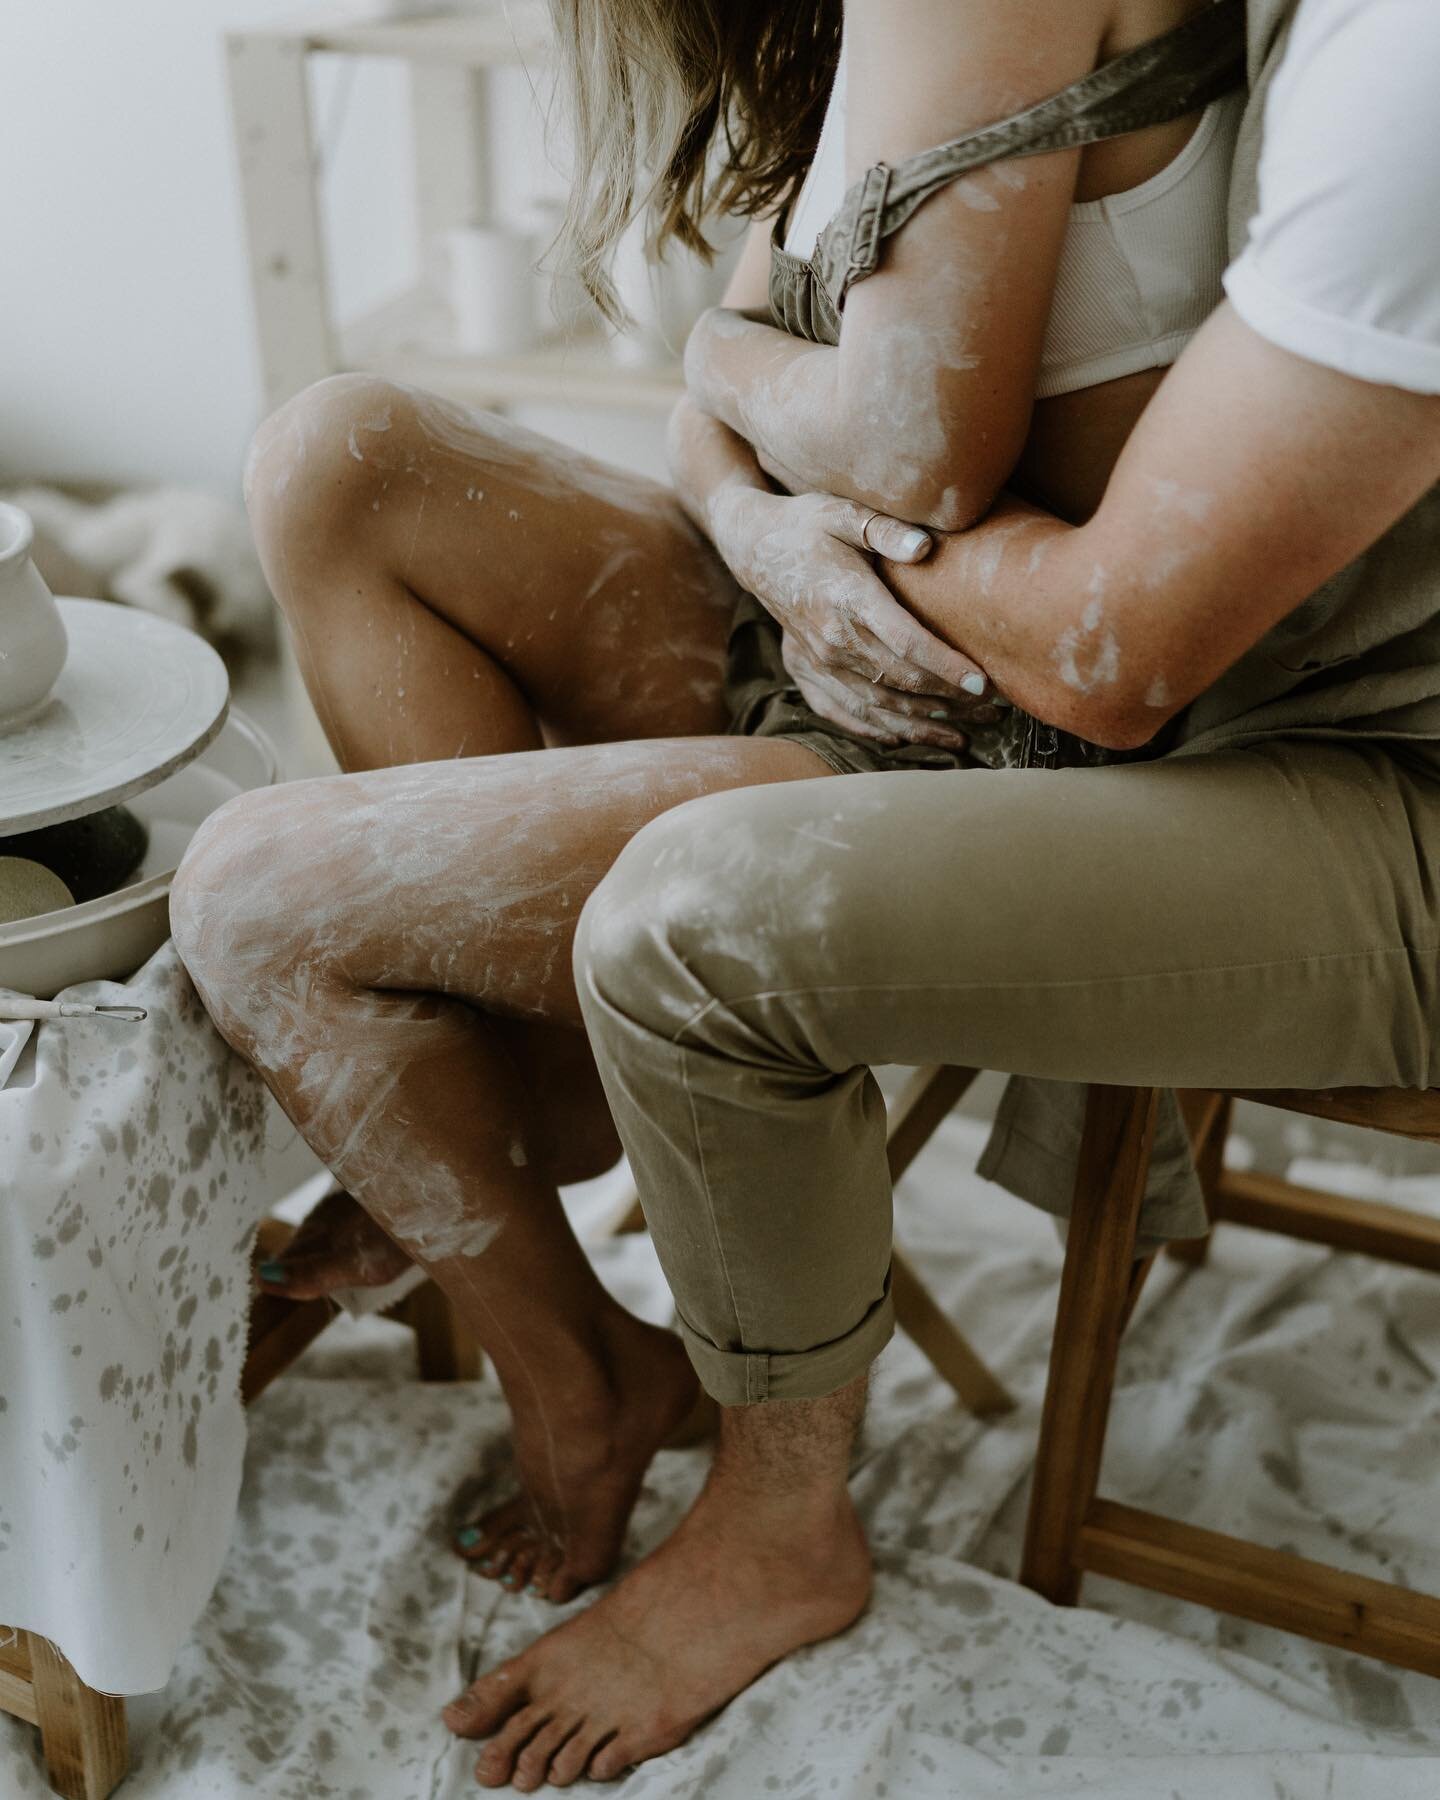 Date night - pottery for two! What is the perfect date night idea?? 
.
.
.
Gear  @sonyalpha a7iii, Zeiss 35mm 1.4
.
.
.
#Datenightideas #engagementsession #pottery #loveauthentic #bohostyle #justlove #thirdwheeling #wildcouple #connectedness #thehapp